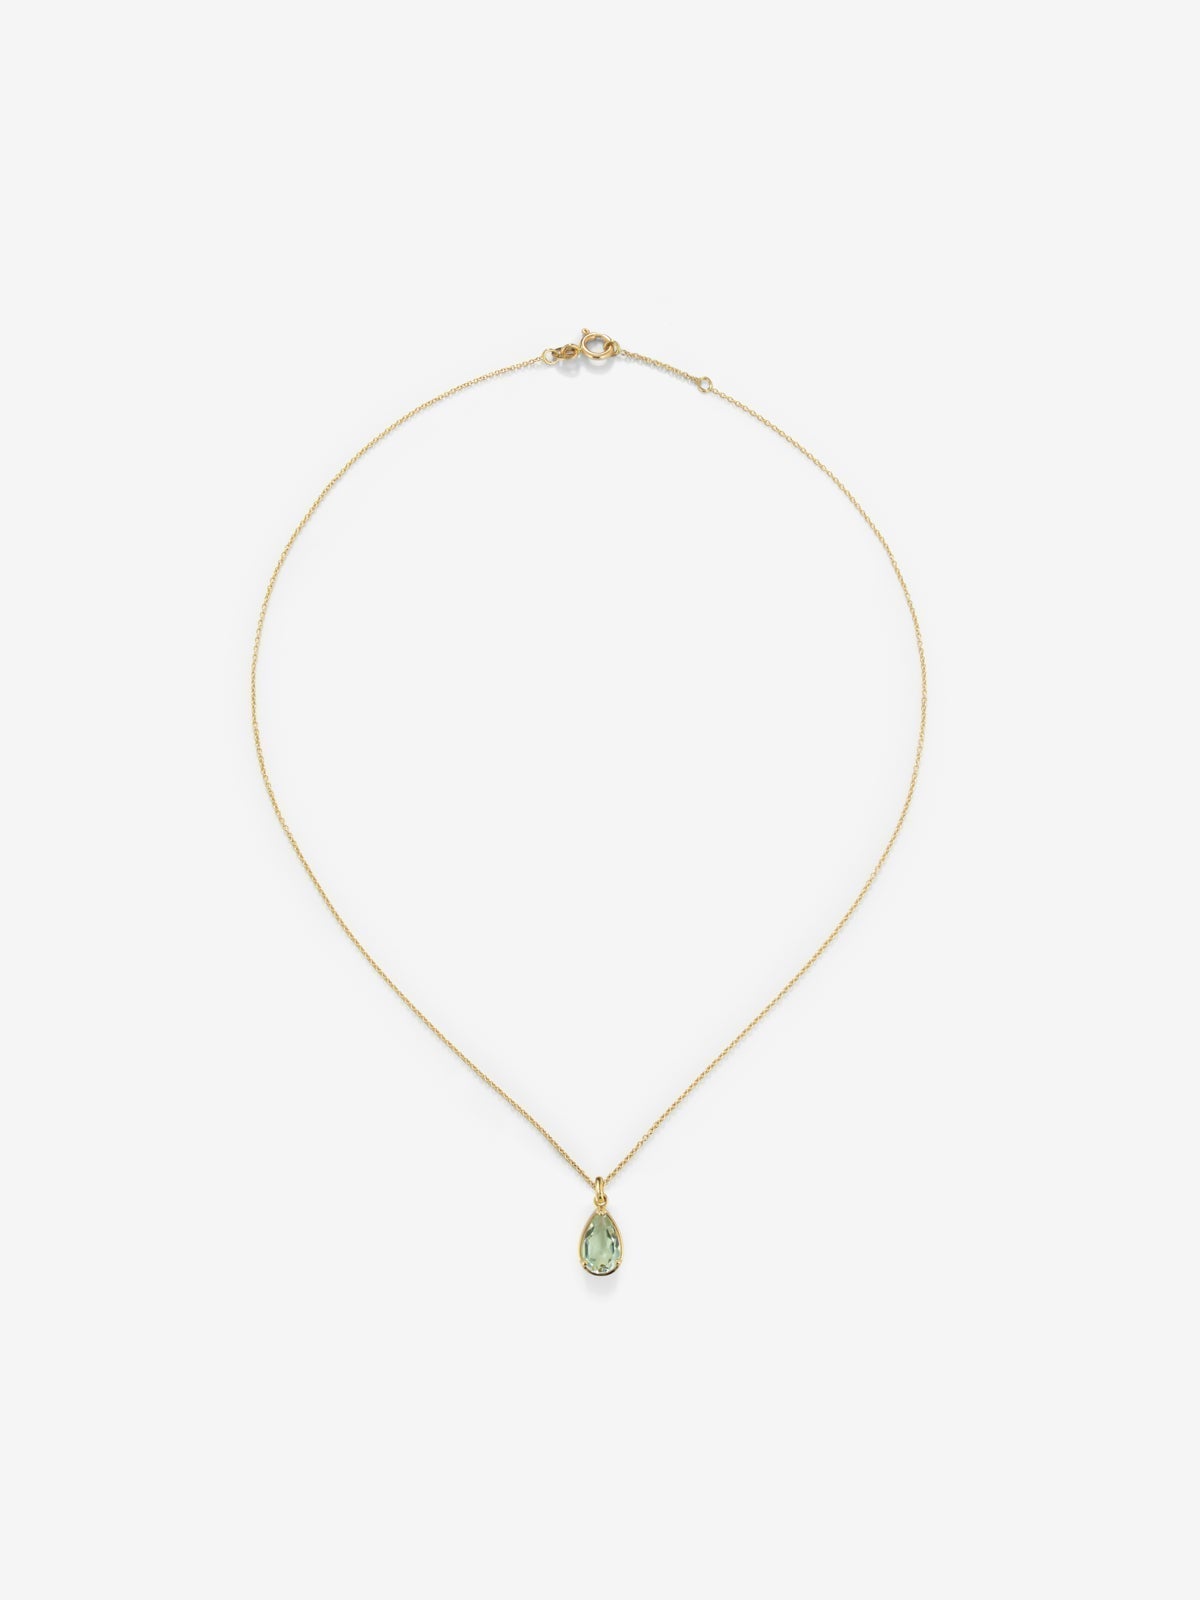 18K Yellow Gold Pendant Chain with Green Amethyst